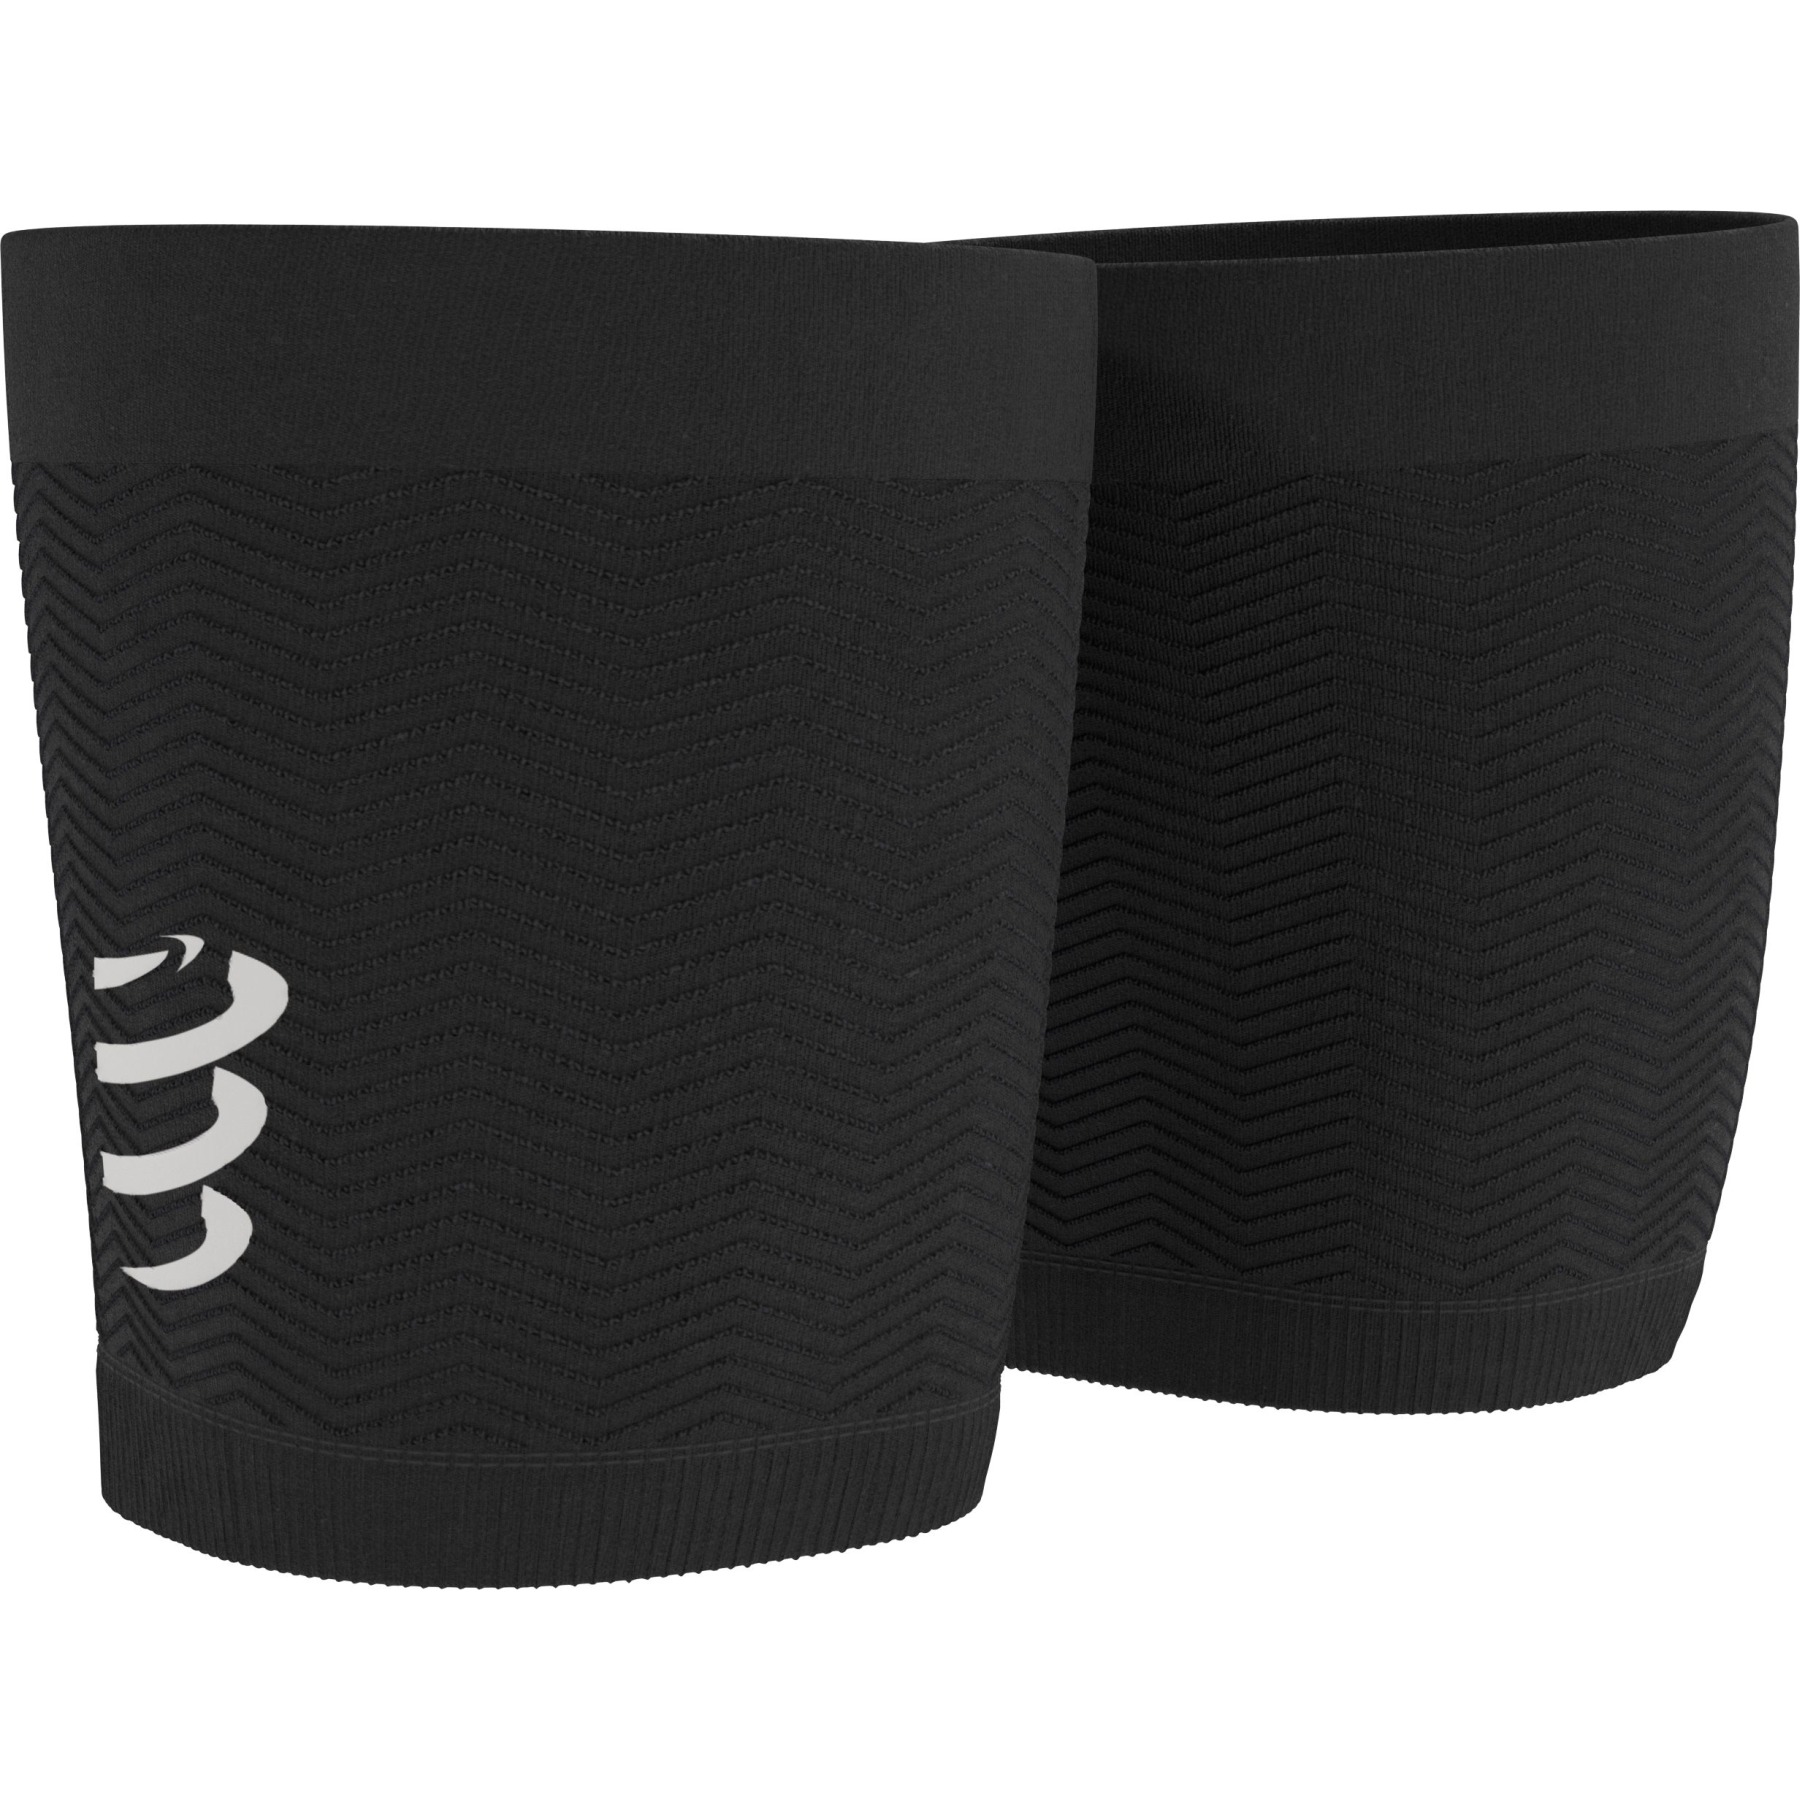 Picture of Compressport Under Control Quad Thigh Sleeves - black